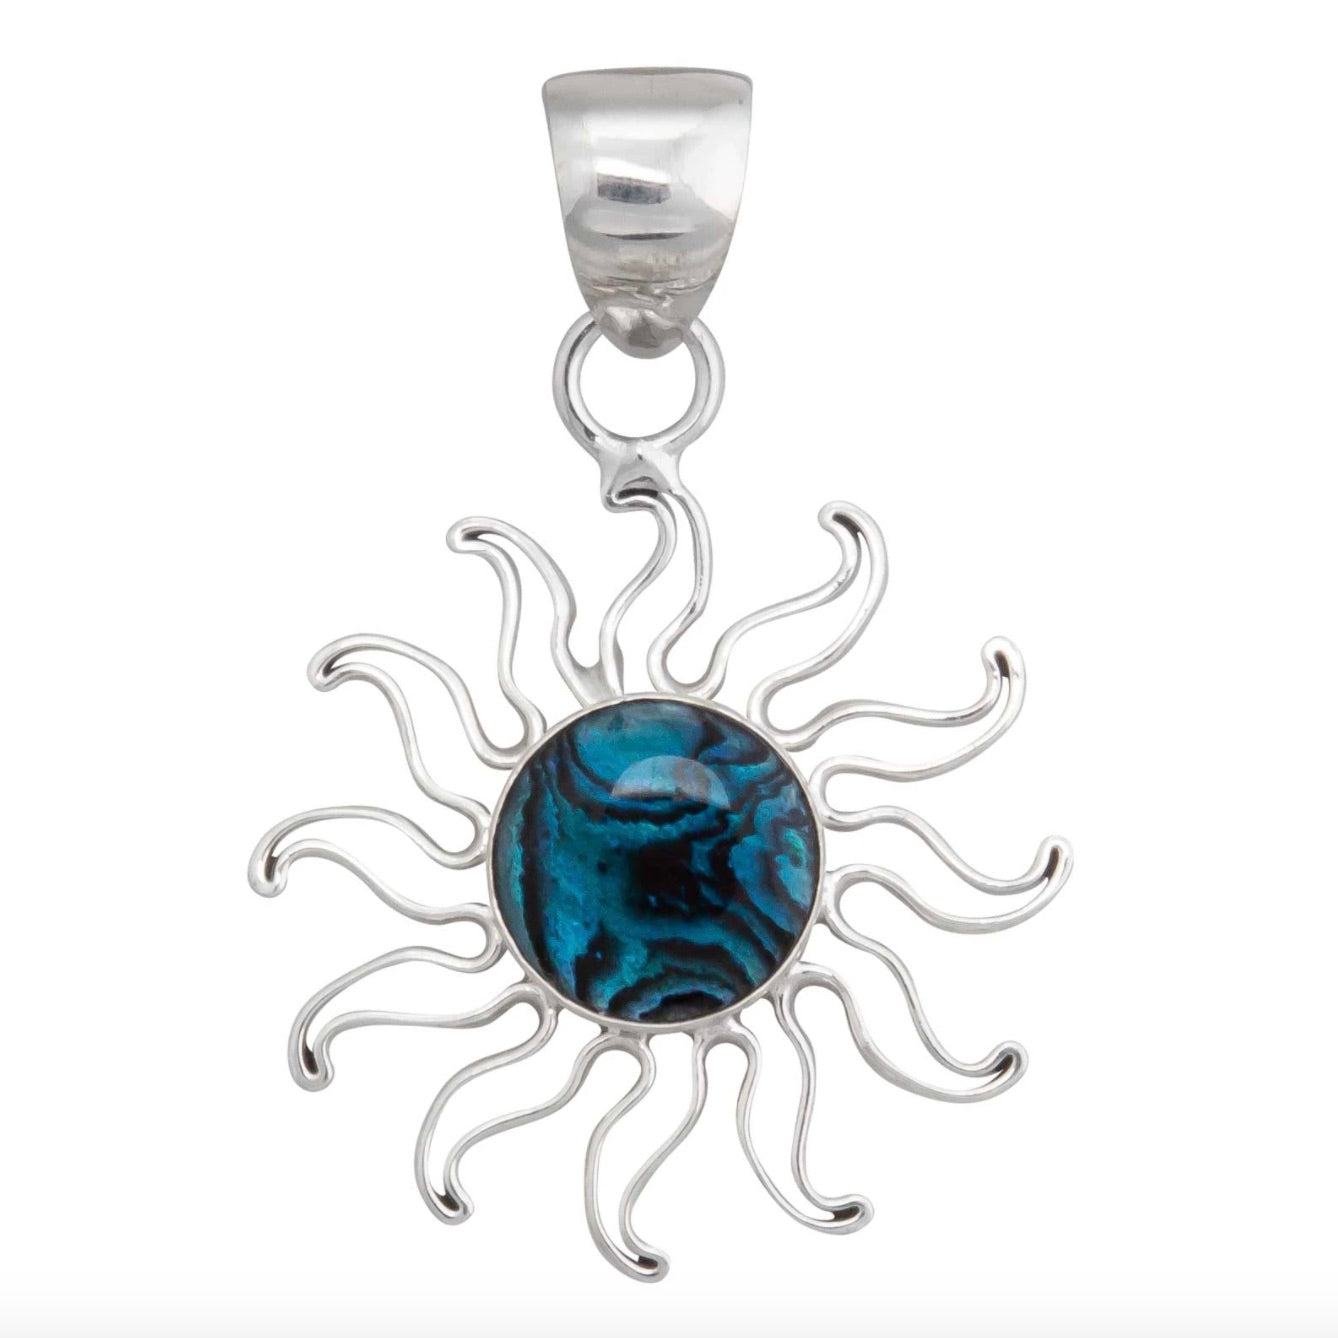 Close up view of a blue abalone sun pendant set in stirling silver